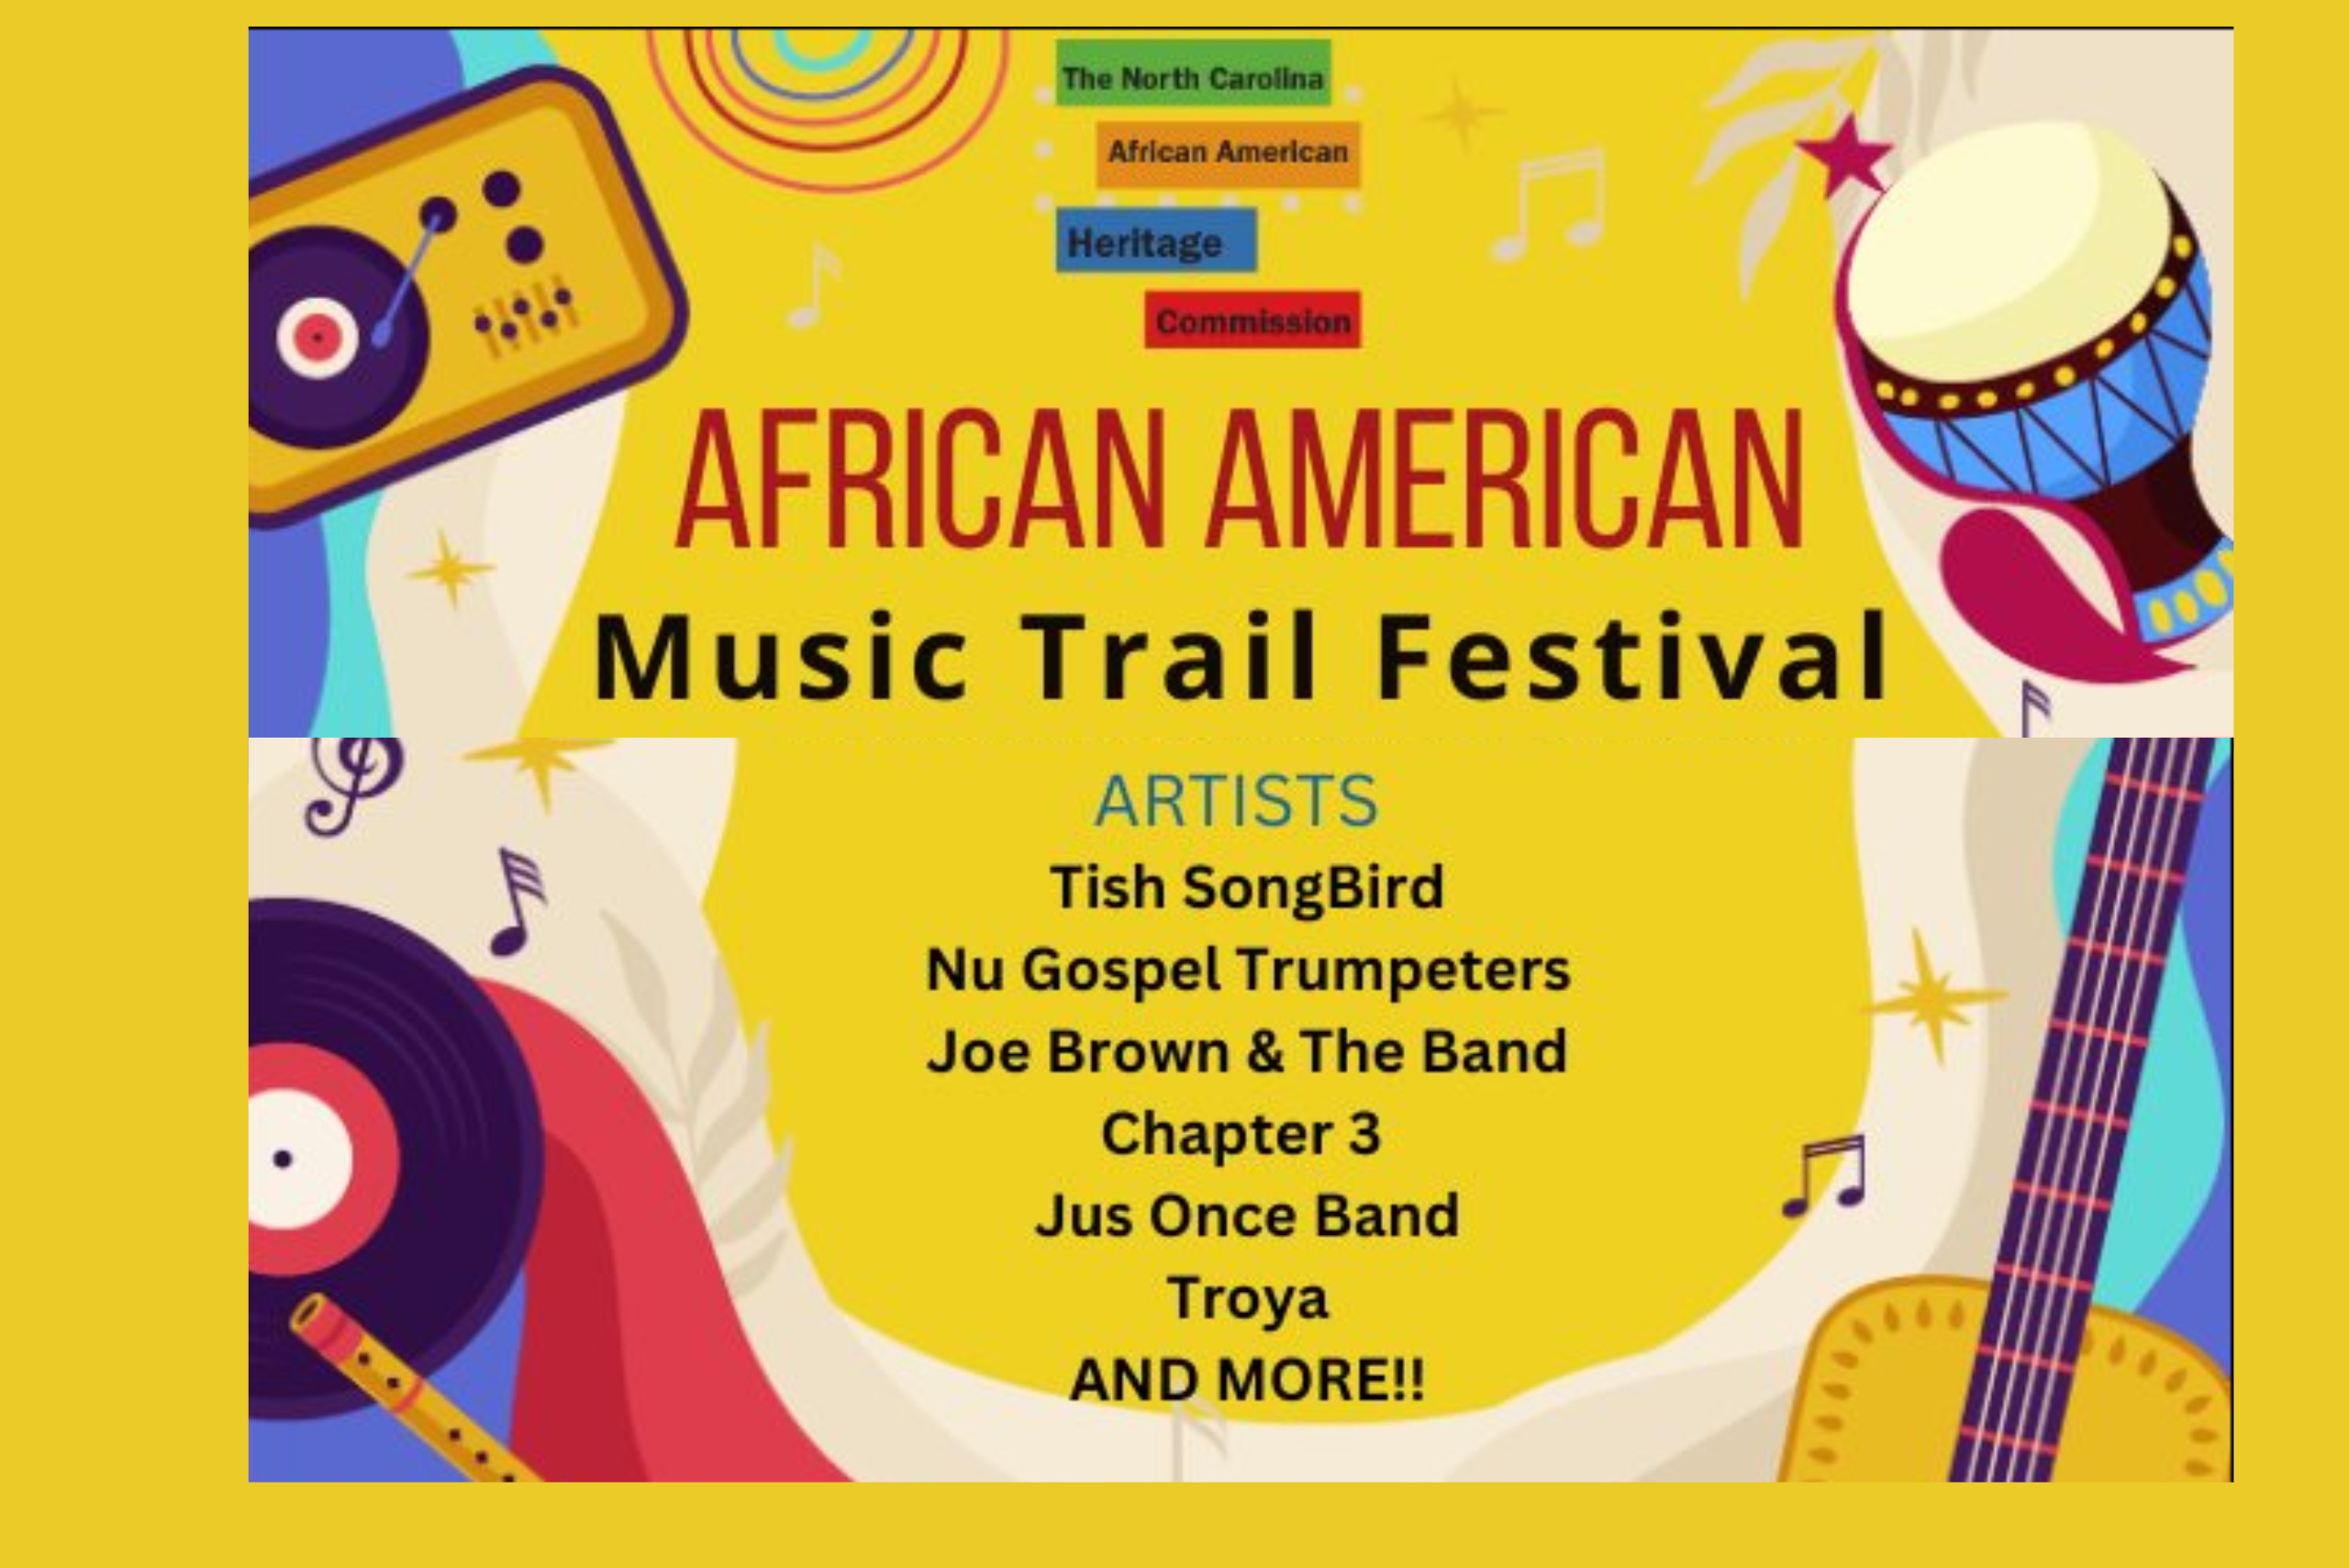 African American Music Trail Festival